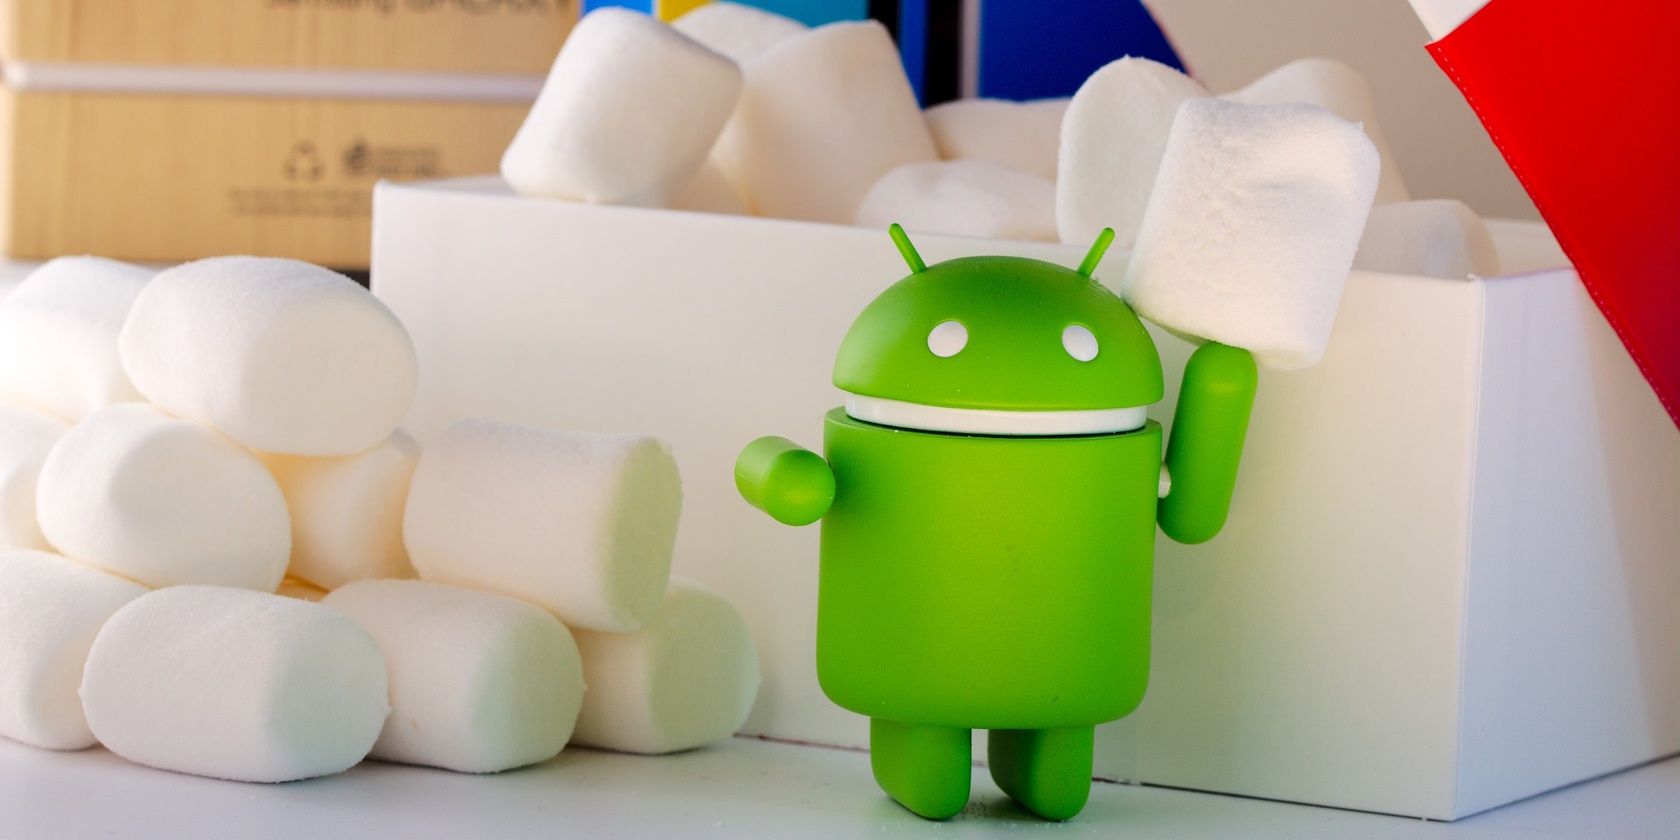 Green Android Symbol Placed Beside a White Box